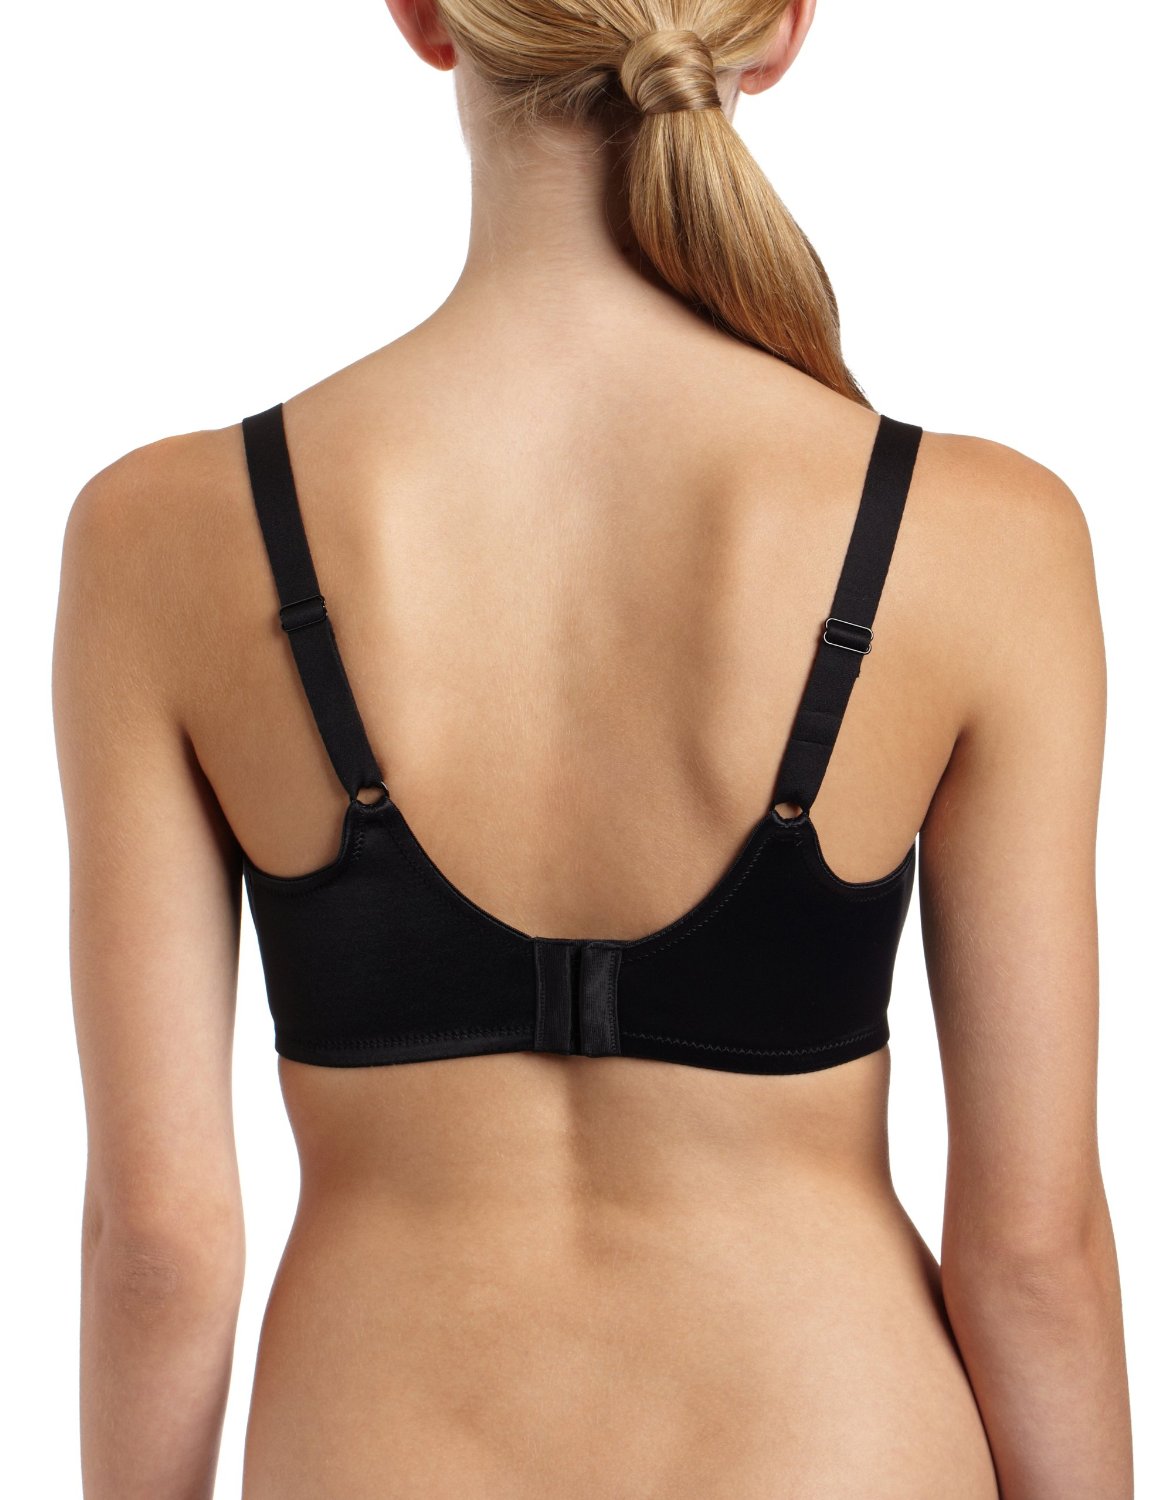 Lilyette By Bali Minimizer Underwire Bra Womens Full Coverage Seamless LY0428 - image 2 of 2